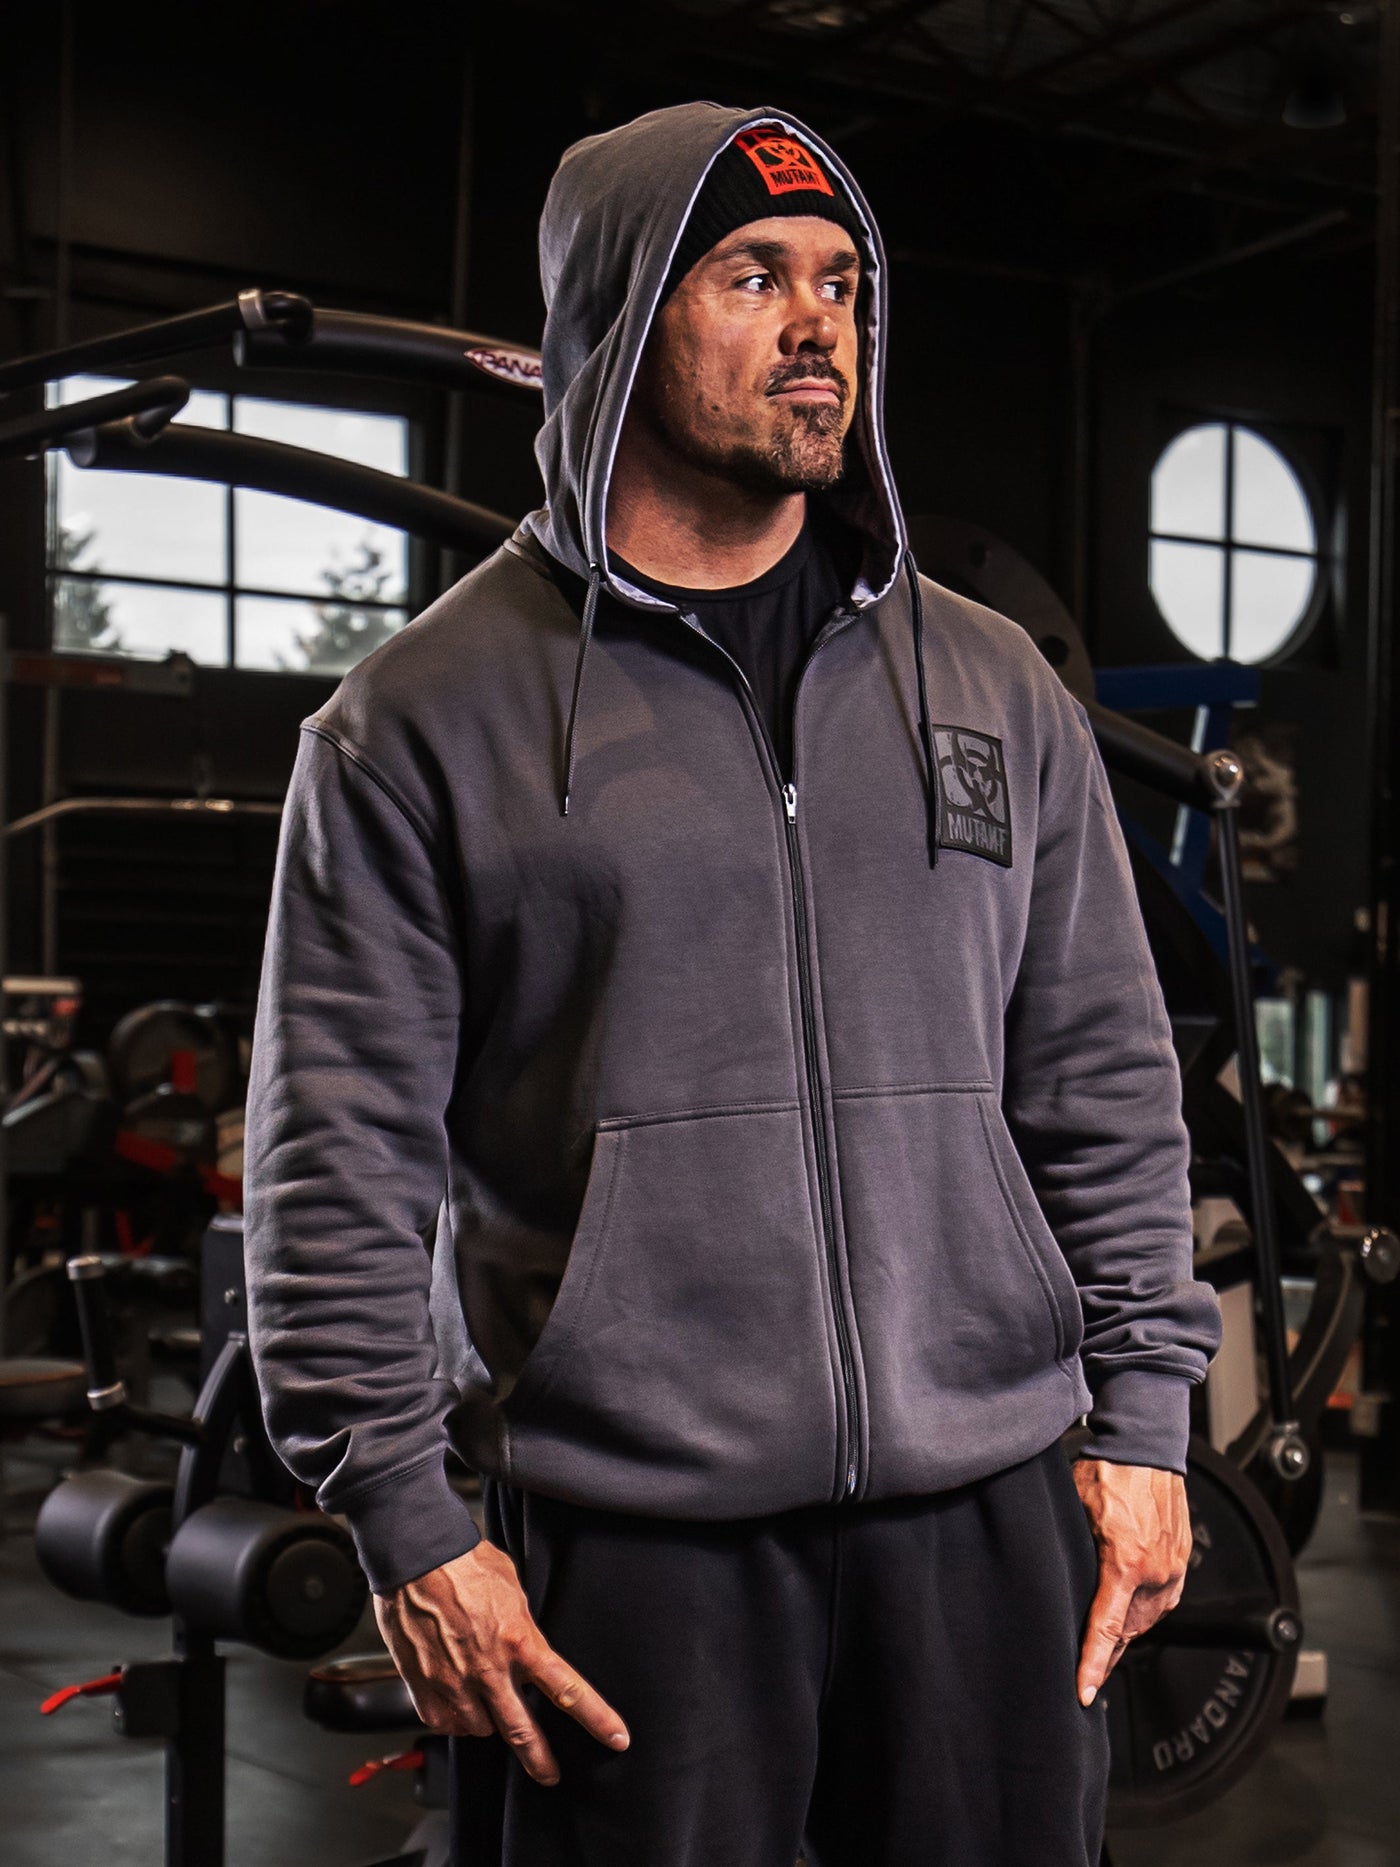 Mutant athlete Ron Partlow posing in the gym, wearing the Grey Mutant Patched Zip-Up Gym Hoodie. The hoodie features a black Mutant logo patch on the left chest, two pockets, and a light grey hood lining with a watermarked Mutant logo.